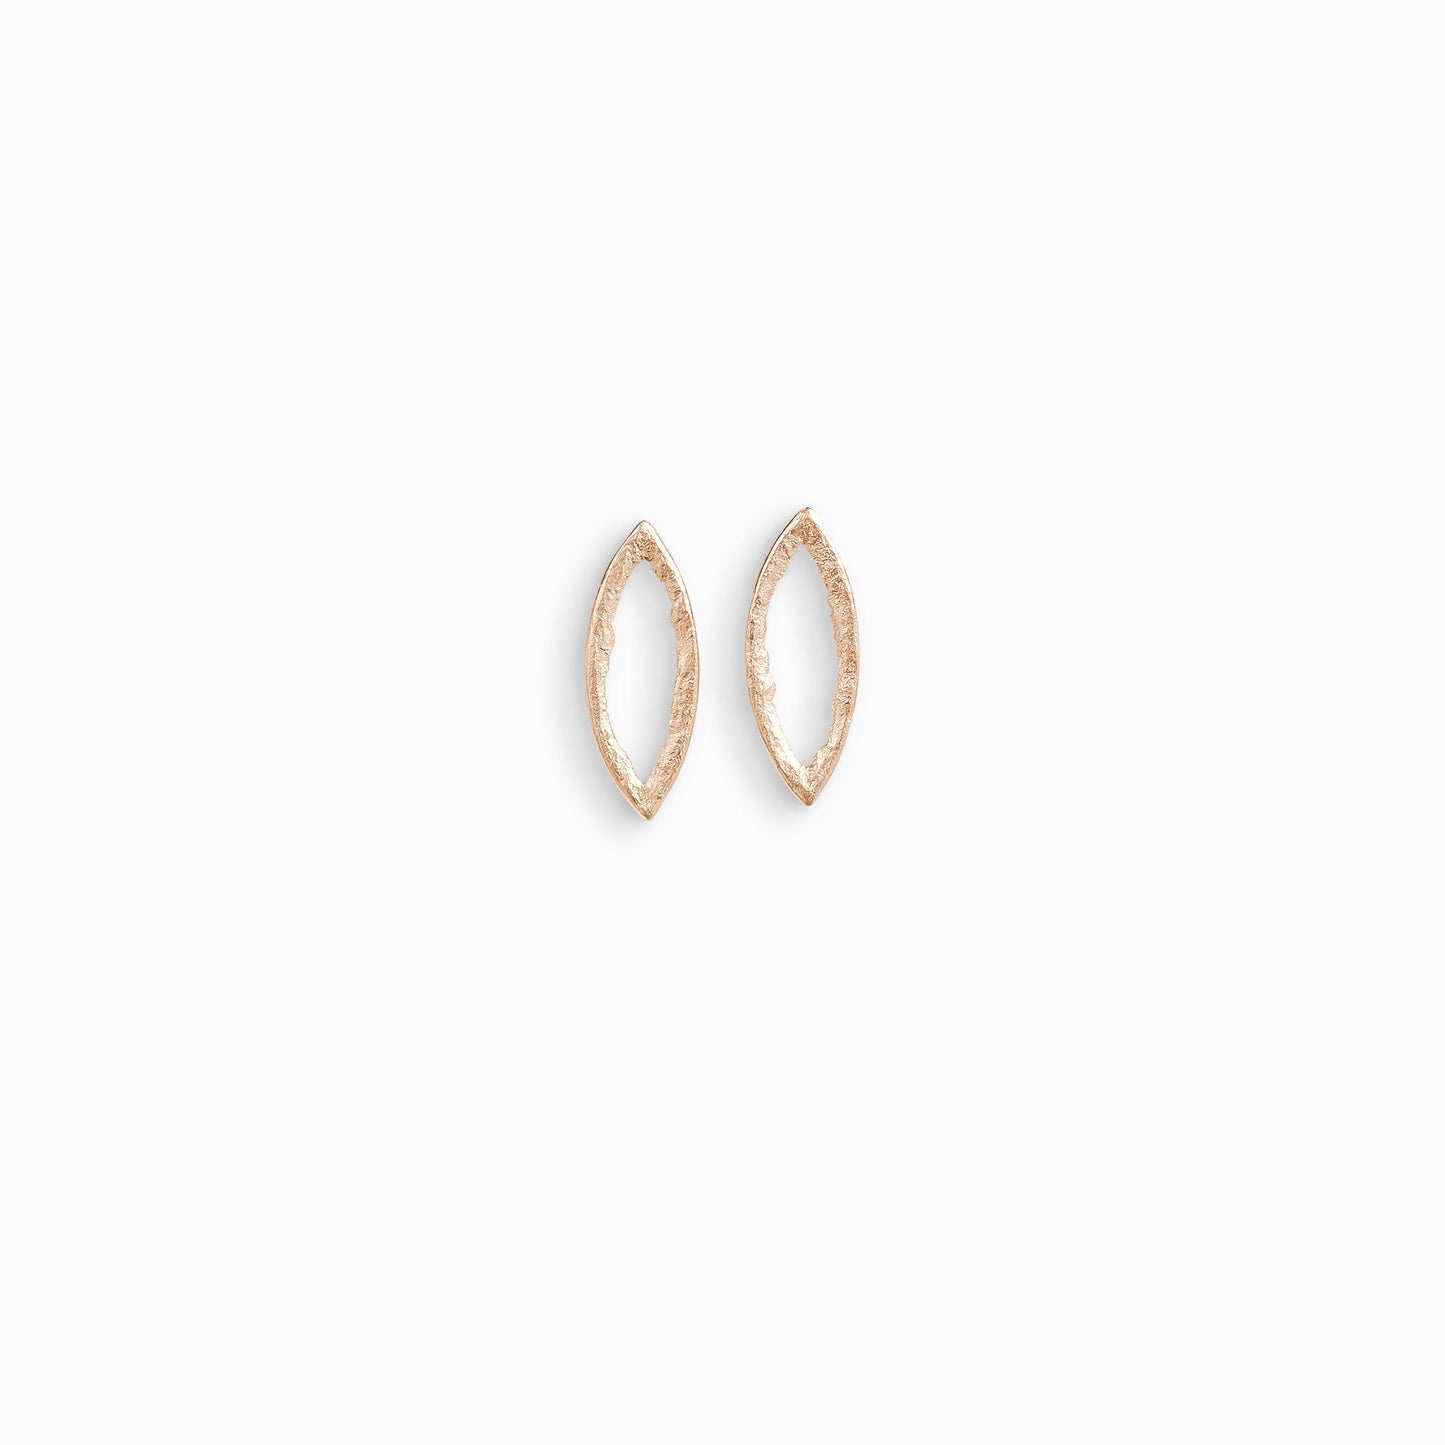 A pair of 18ct Fairtrade rose gold stud earrings, lozenge in form with an open centre. Strong organic texture. Smooth outside edge, fragmented inside edges. 26mm x 10mm 